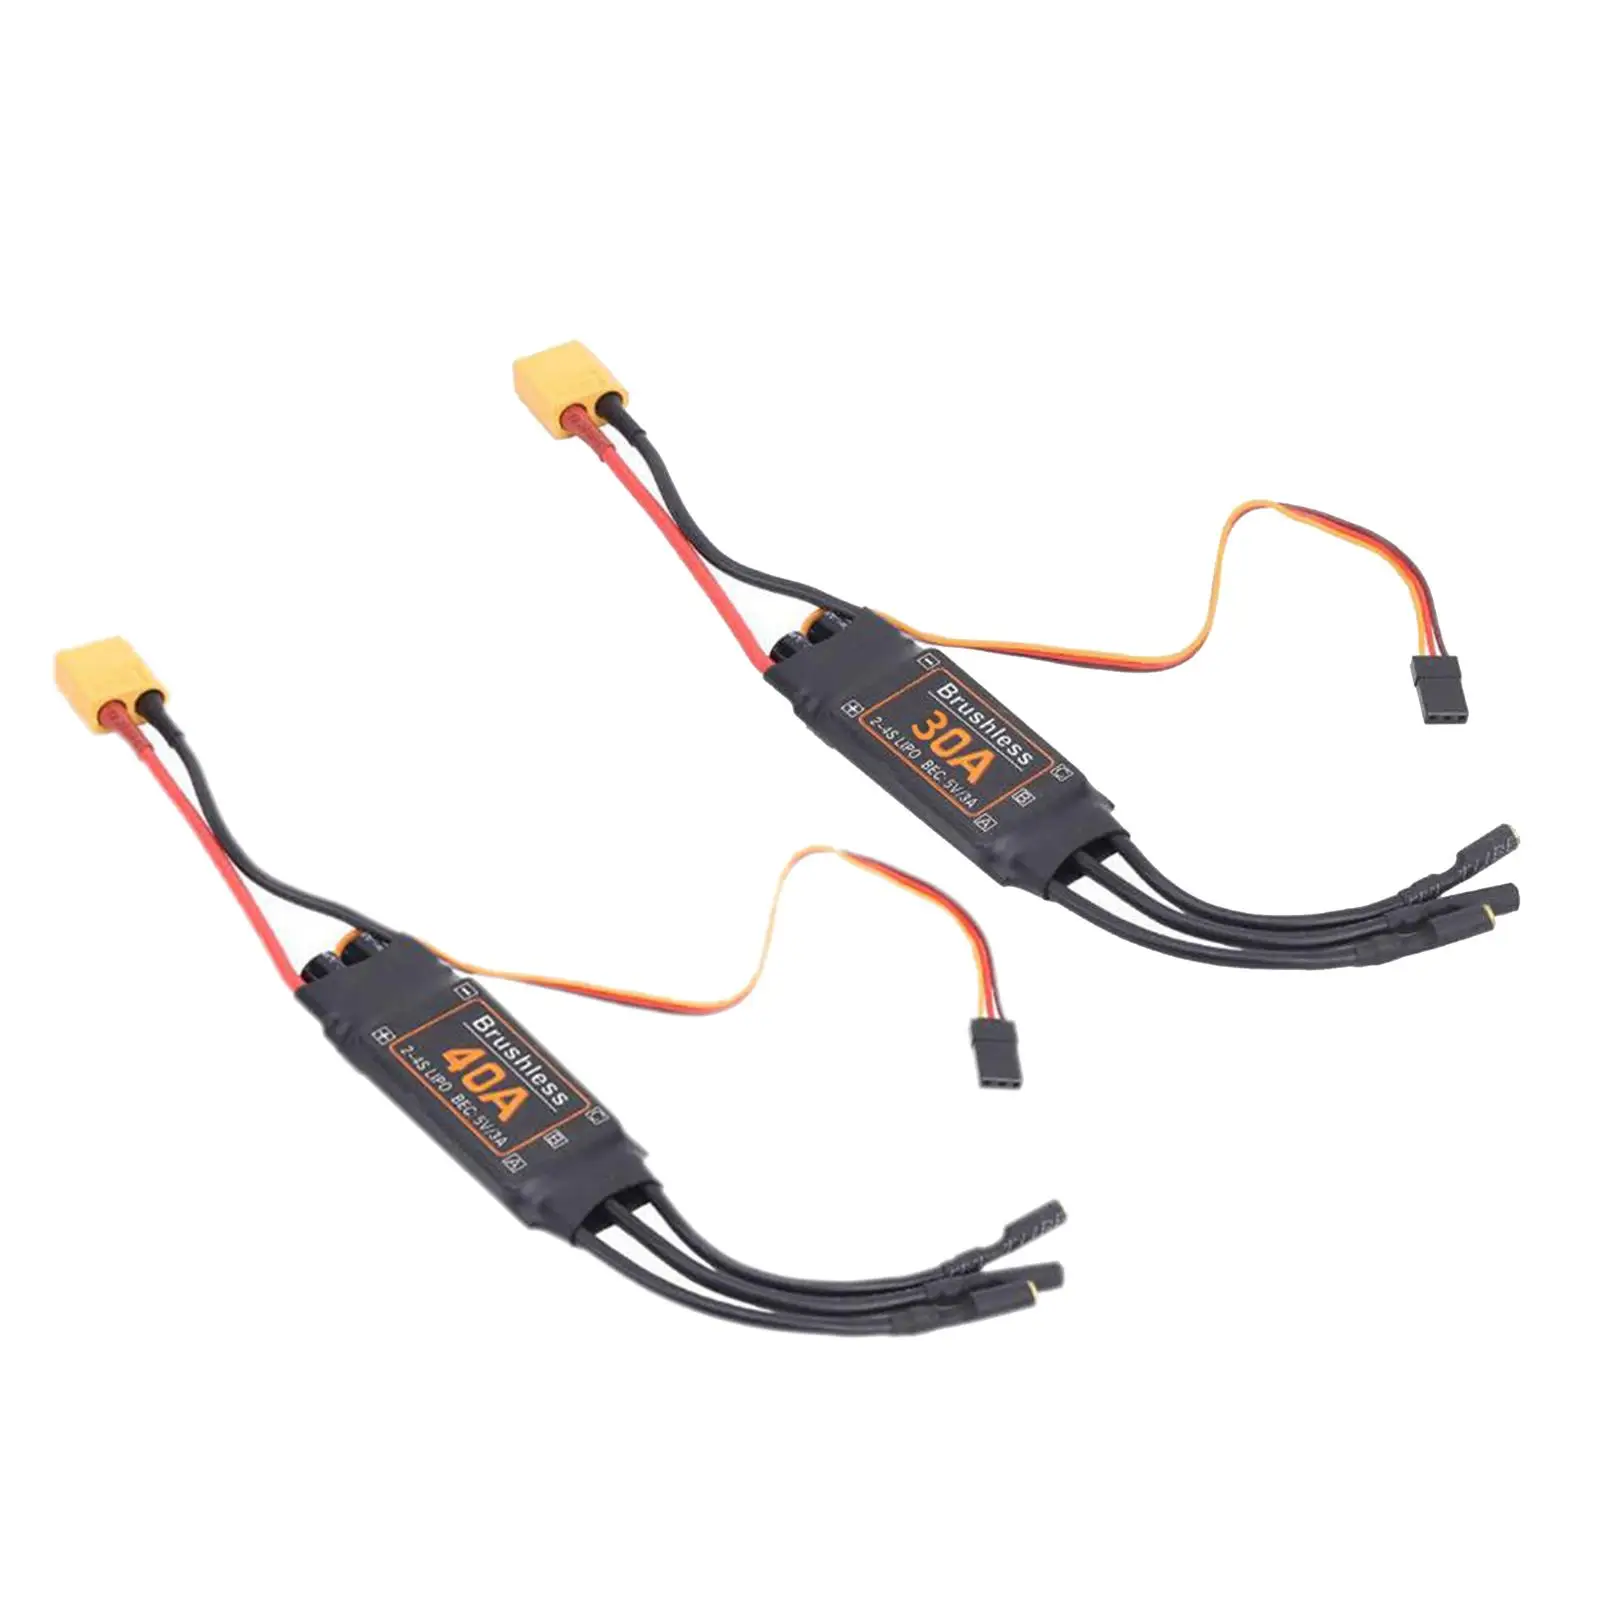 RC ESC XT60 Plug Low Battery Protection Accessories Upgrade Parts Replaces for RC Helicopter Accs Replaces images - 5